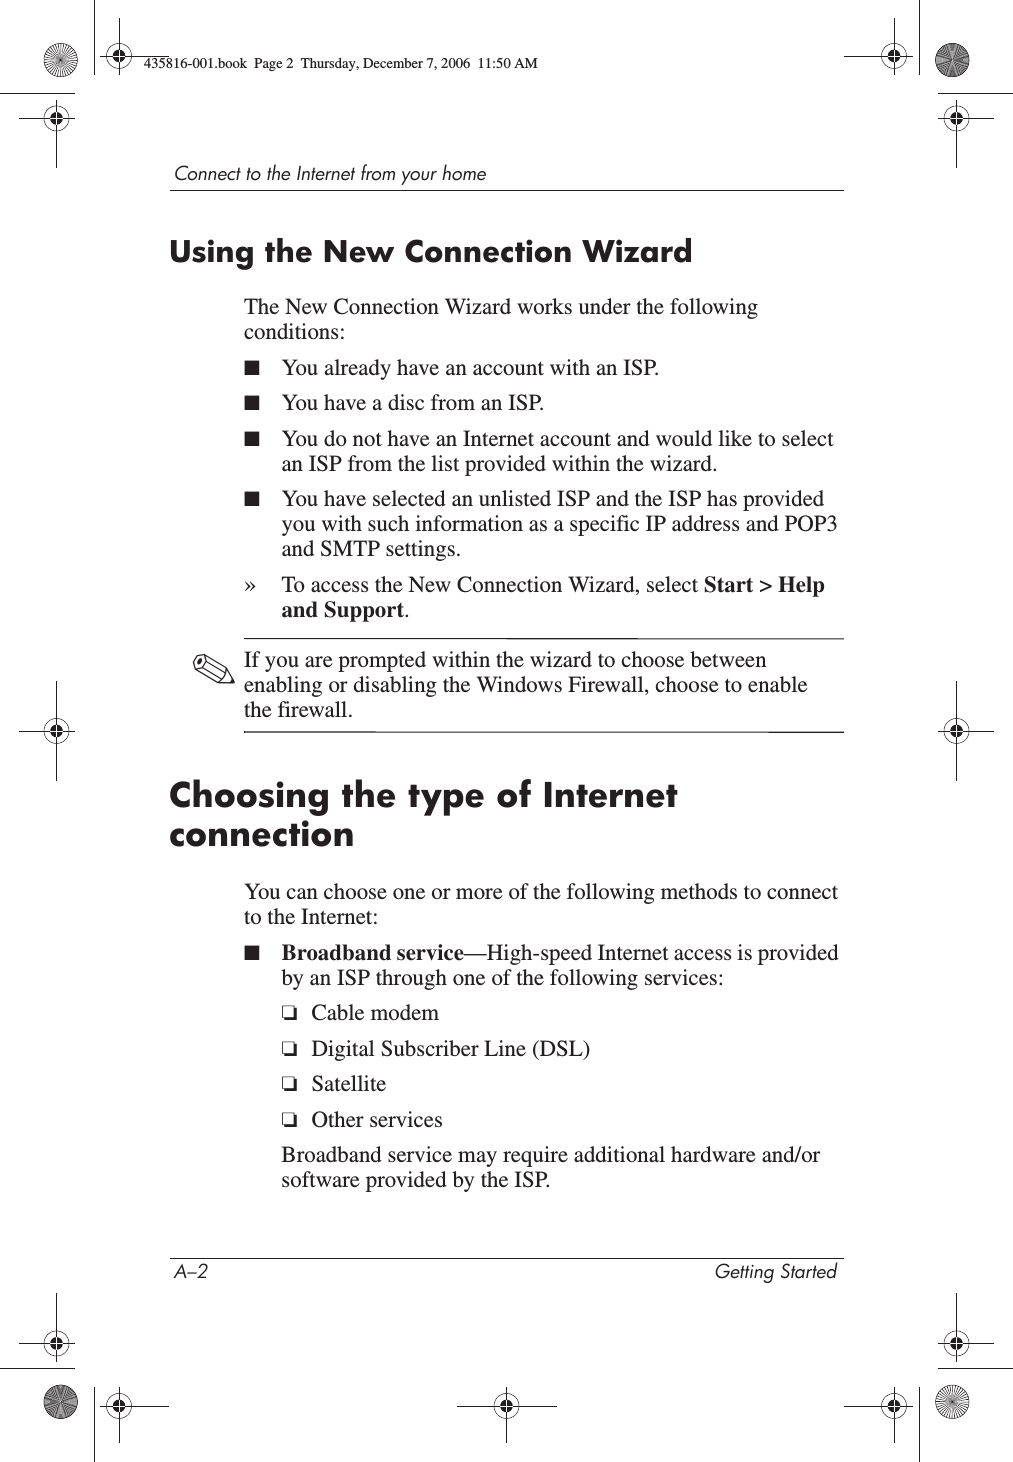 A–2 Getting StartedConnect to the Internet from your homeUsing the New Connection WizardThe New Connection Wizard works under the following conditions:■You already have an account with an ISP.■You have a disc from an ISP.■You do not have an Internet account and would like to select an ISP from the list provided within the wizard.■You have selected an unlisted ISP and the ISP has provided you with such information as a specific IP address and POP3 and SMTP settings.»To access the New Connection Wizard, select Start &gt; Help and Support.✎If you are prompted within the wizard to choose between enabling or disabling the Windows Firewall, choose to enable the firewall. Choosing the type of Internet connection You can choose one or more of the following methods to connect to the Internet:■Broadband service—High-speed Internet access is provided by an ISP through one of the following services:❏Cable modem❏Digital Subscriber Line (DSL)❏Satellite❏Other servicesBroadband service may require additional hardware and/or software provided by the ISP.435816-001.book  Page 2  Thursday, December 7, 2006  11:50 AM